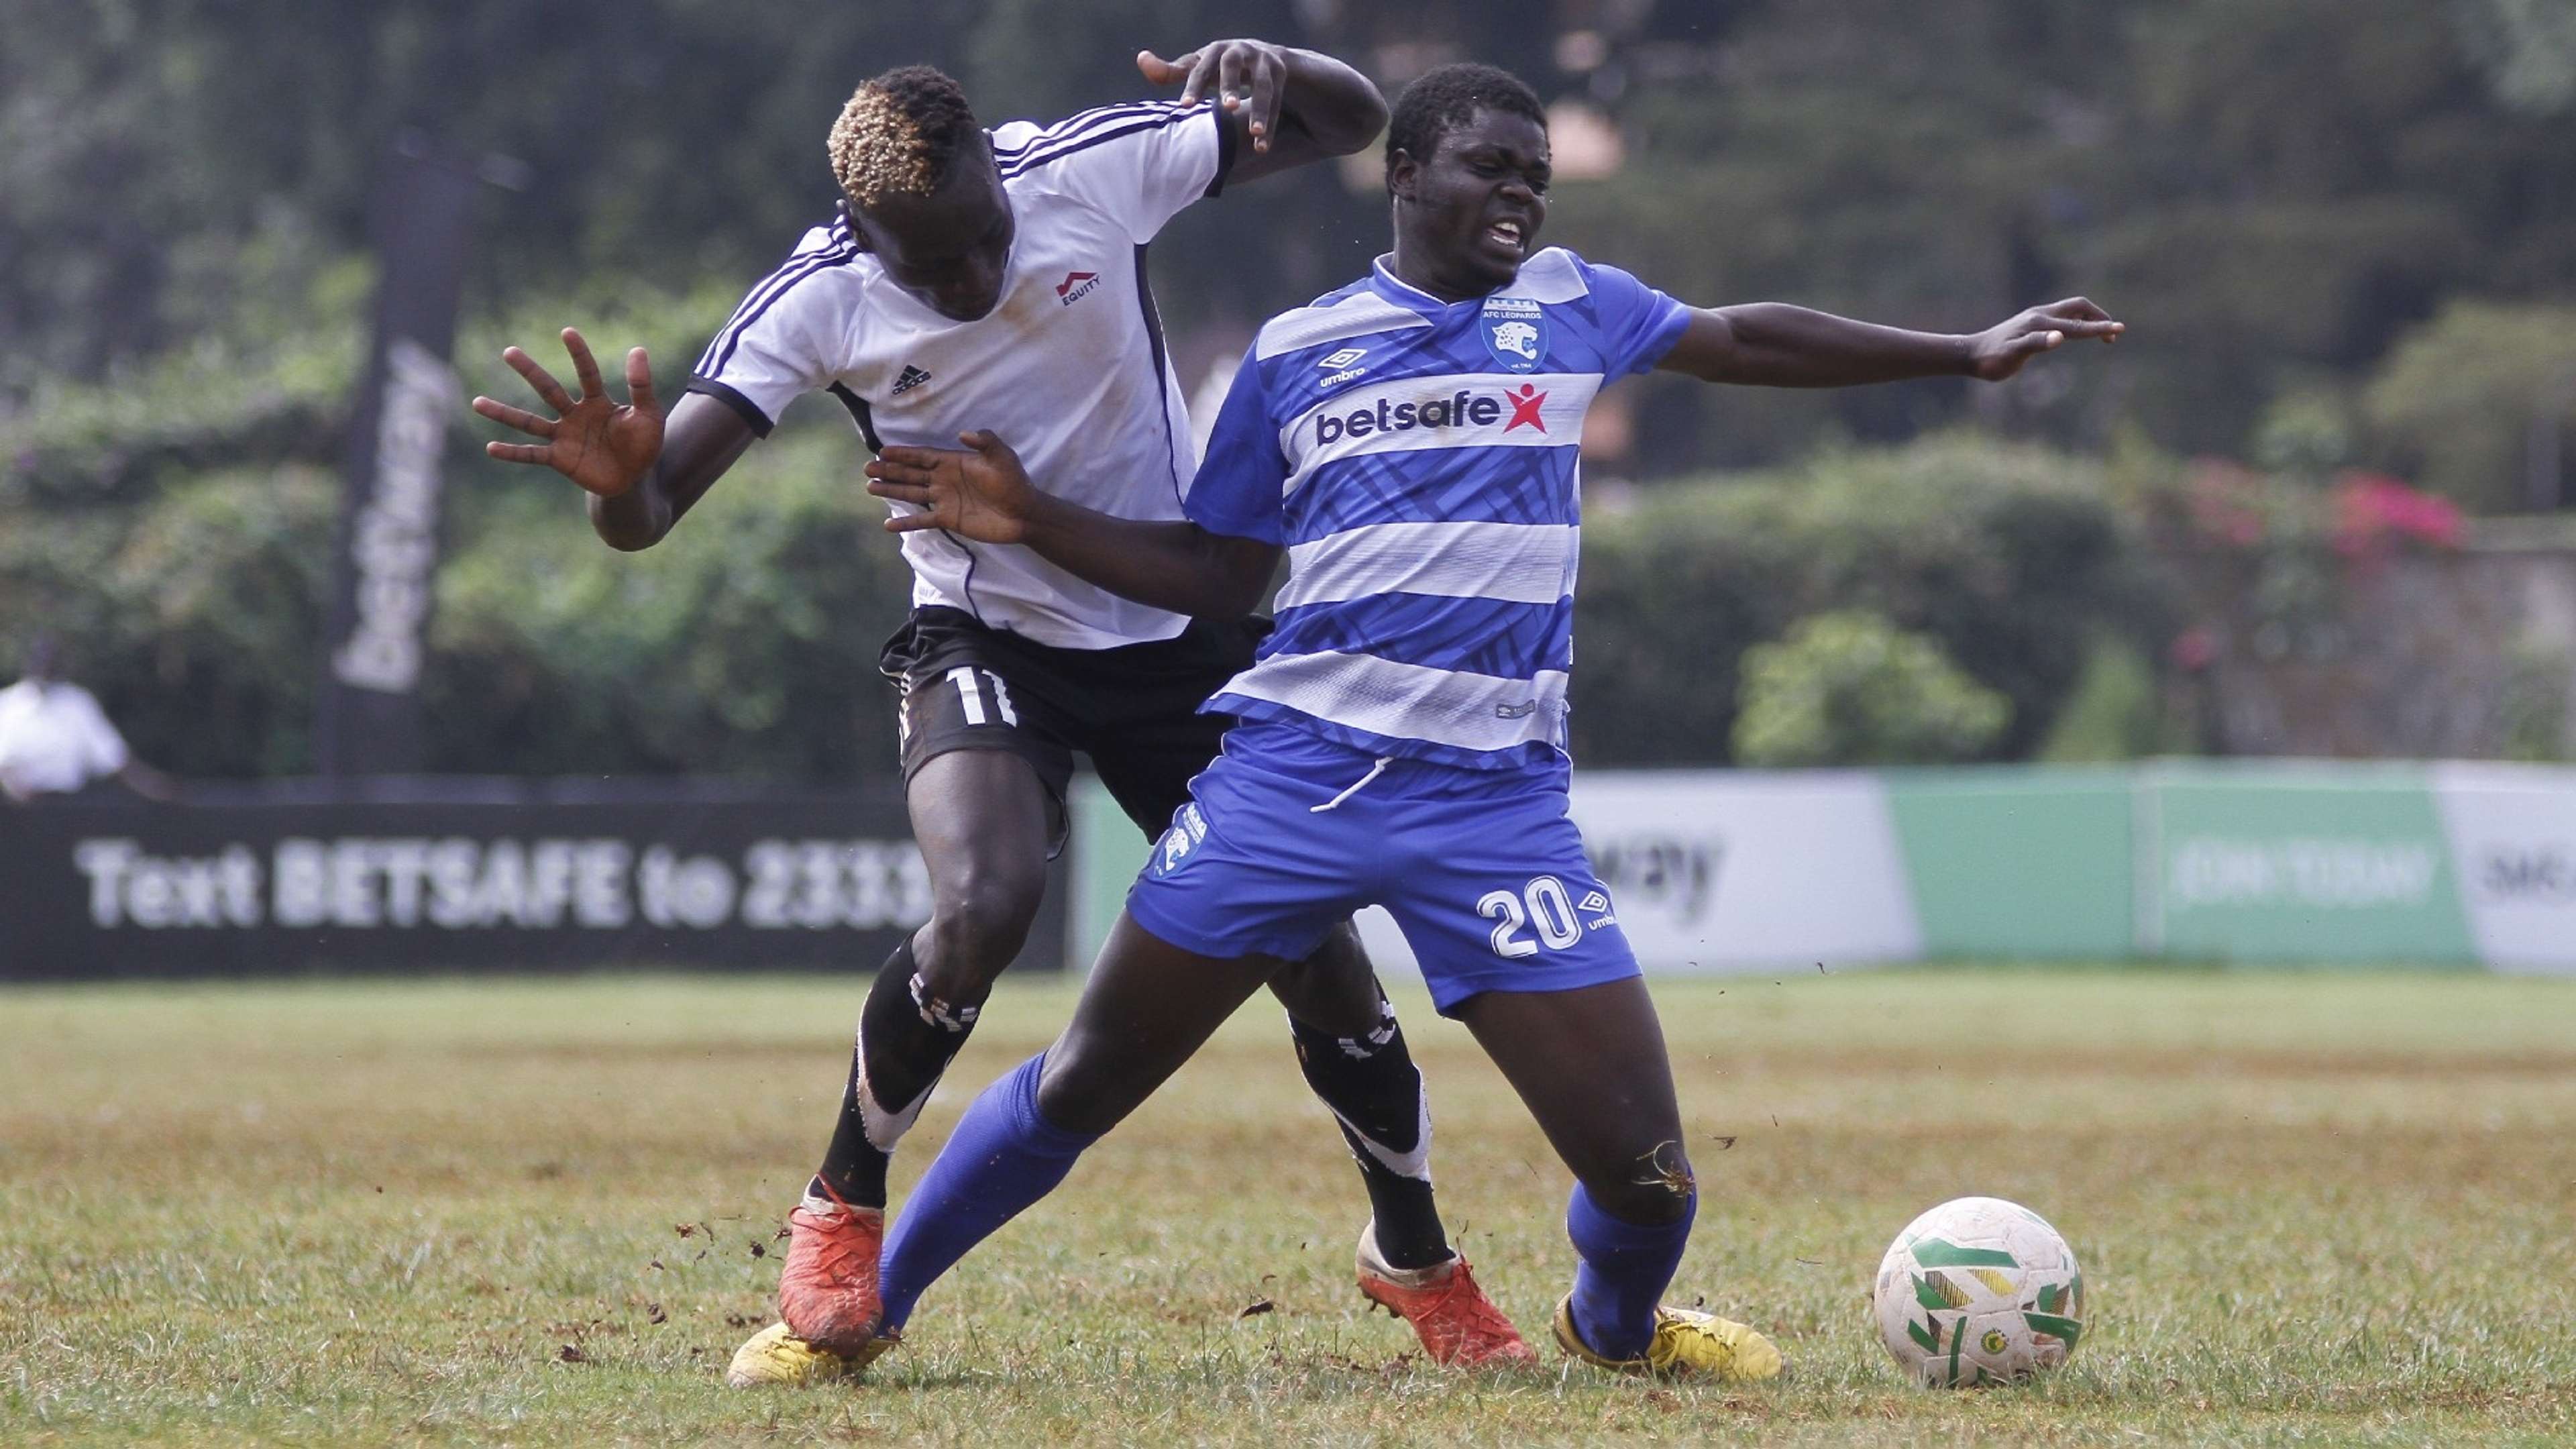 AFC Leopards Davis Sunguti trying to retain control of the ball from Equity's Bryson Wangai.